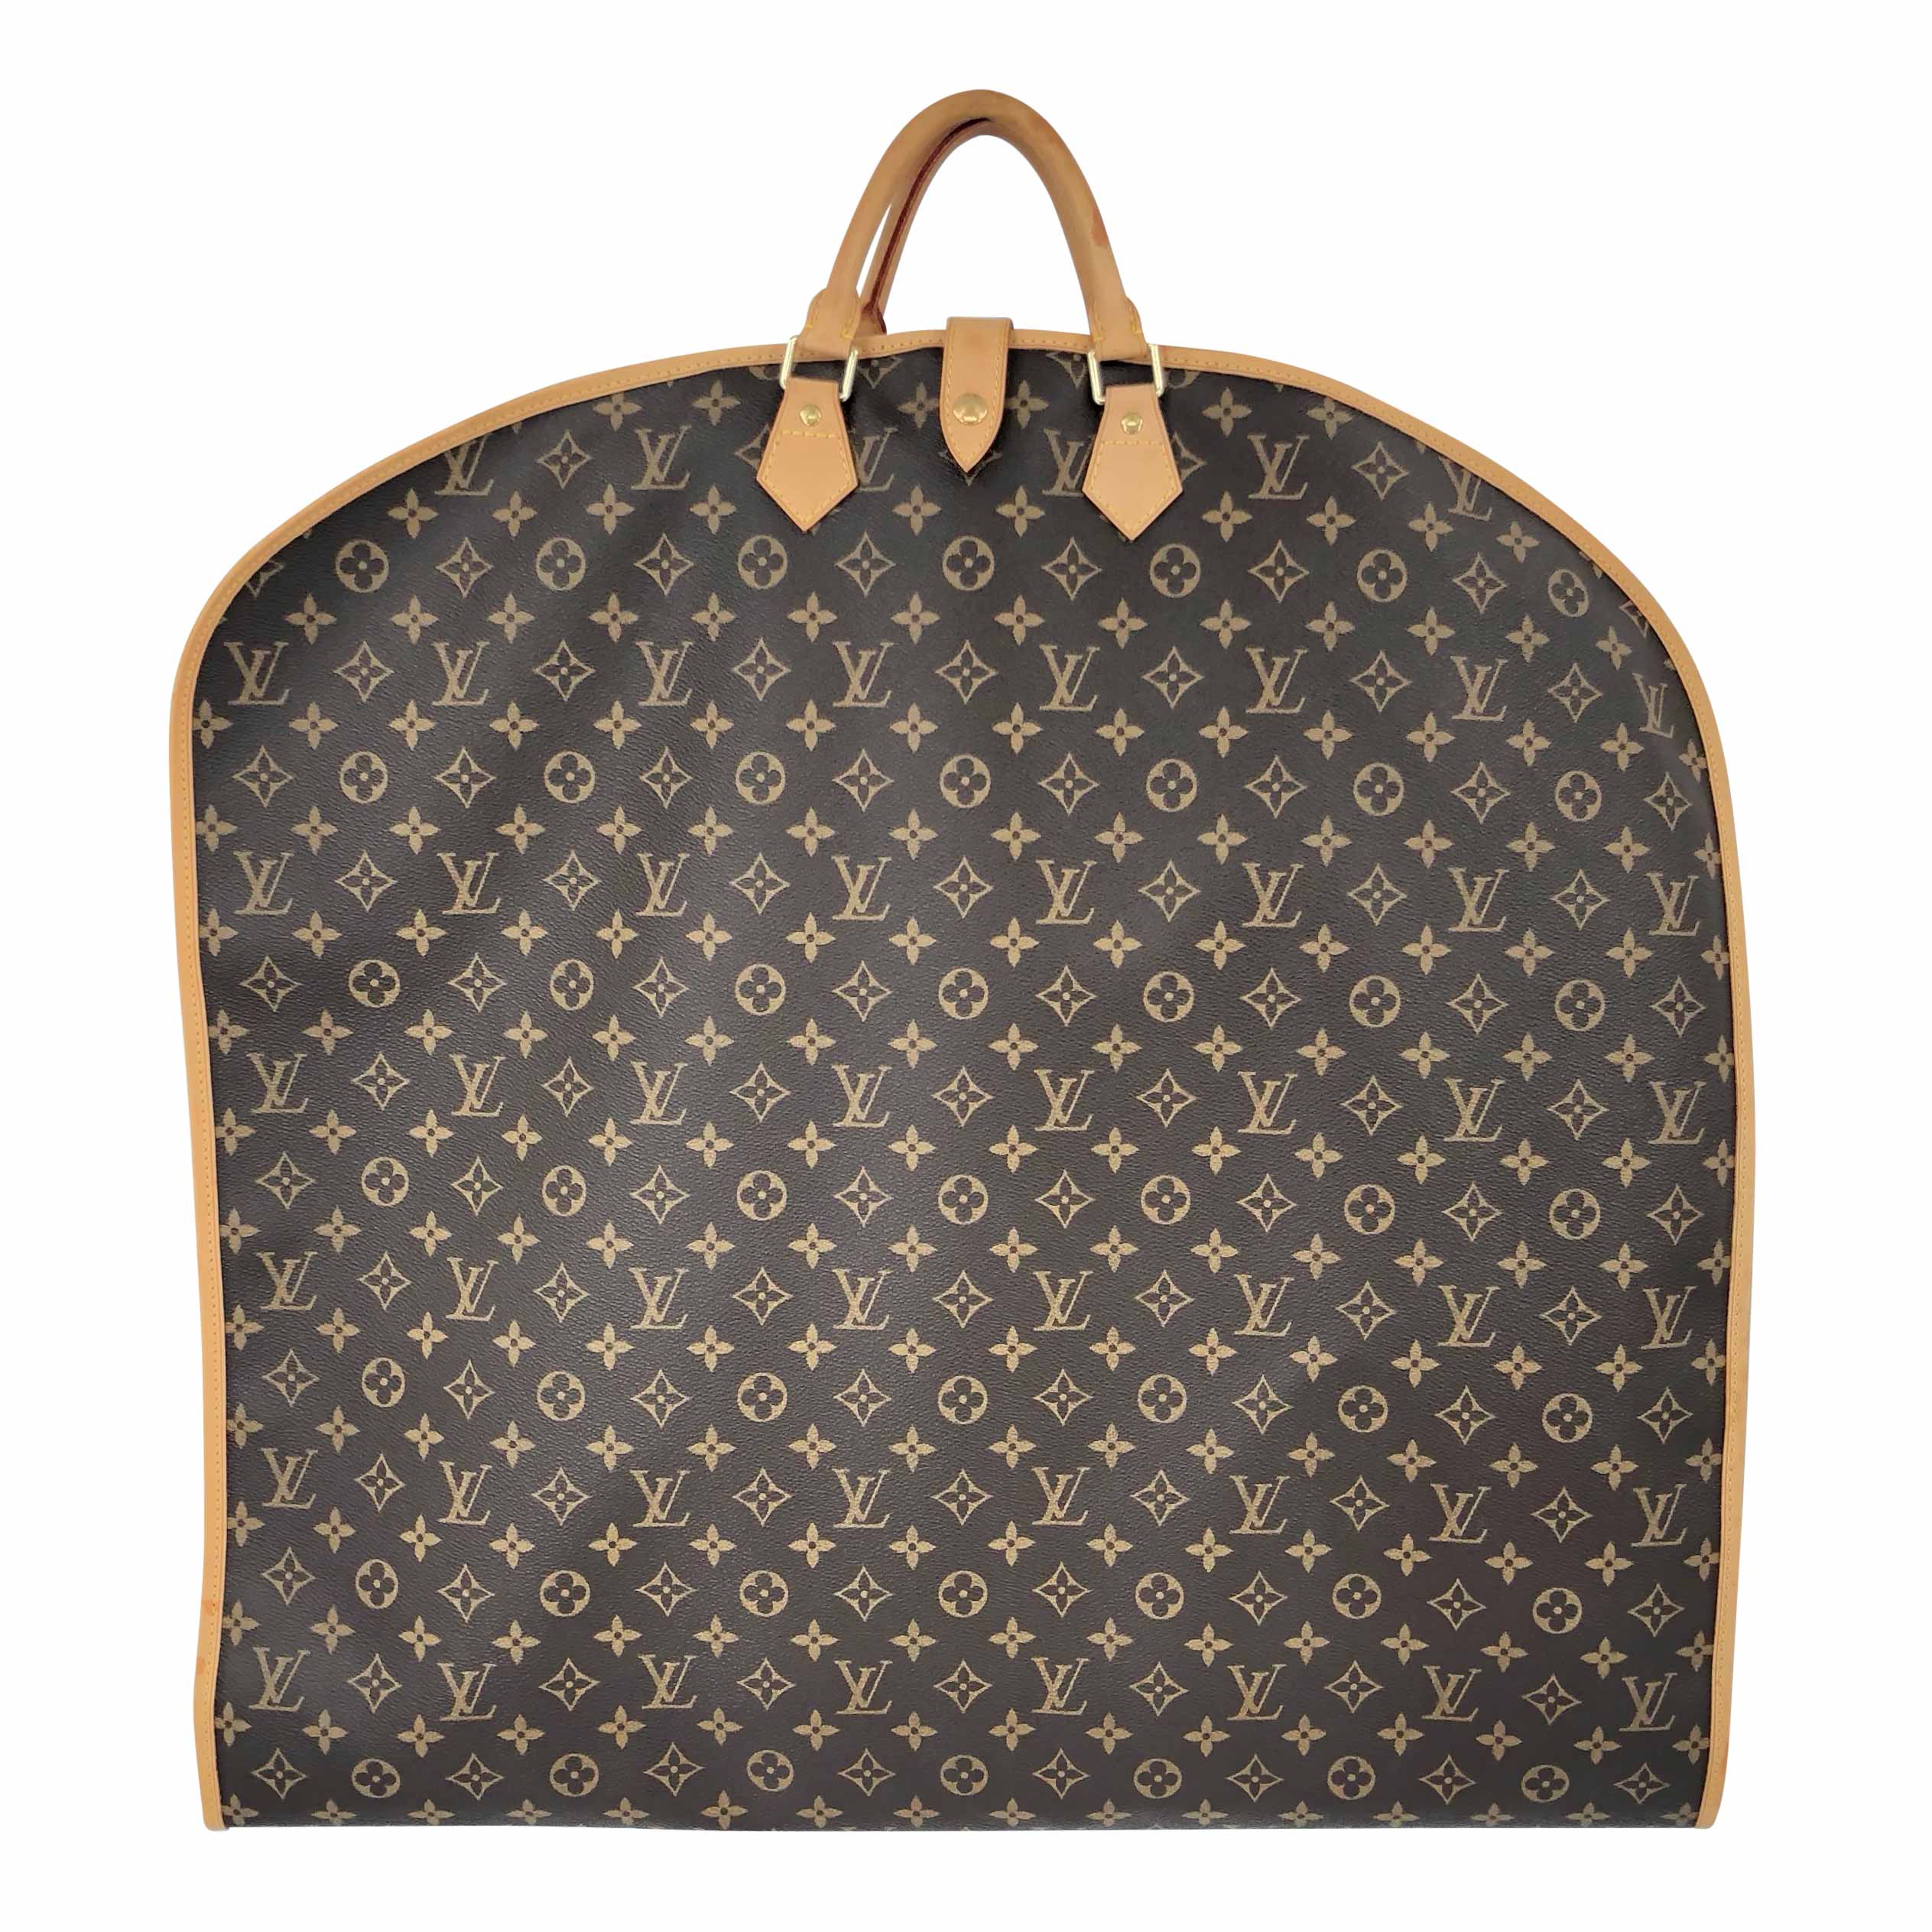 Louis Vuitton Duffle Bag Is It Worth It  Luxury LV Keepall Bag Review